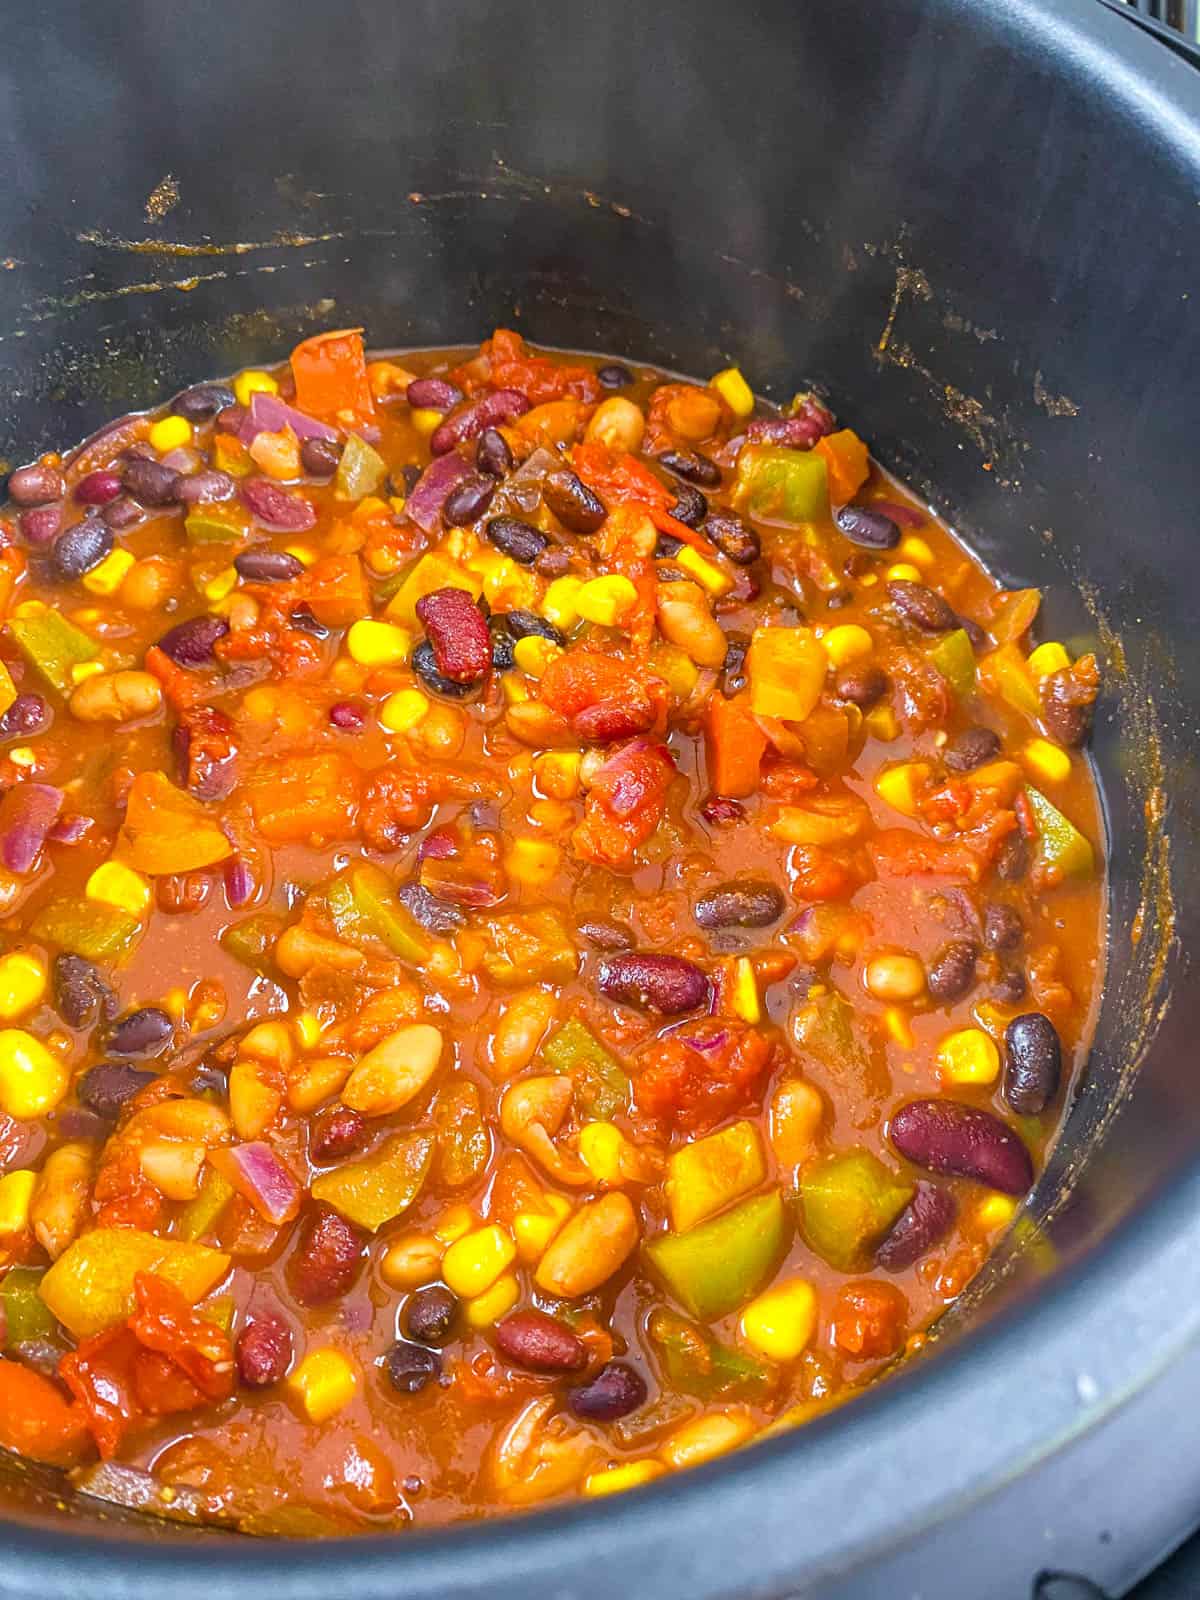 Vegetarian chili cooking in the Instant Pot.